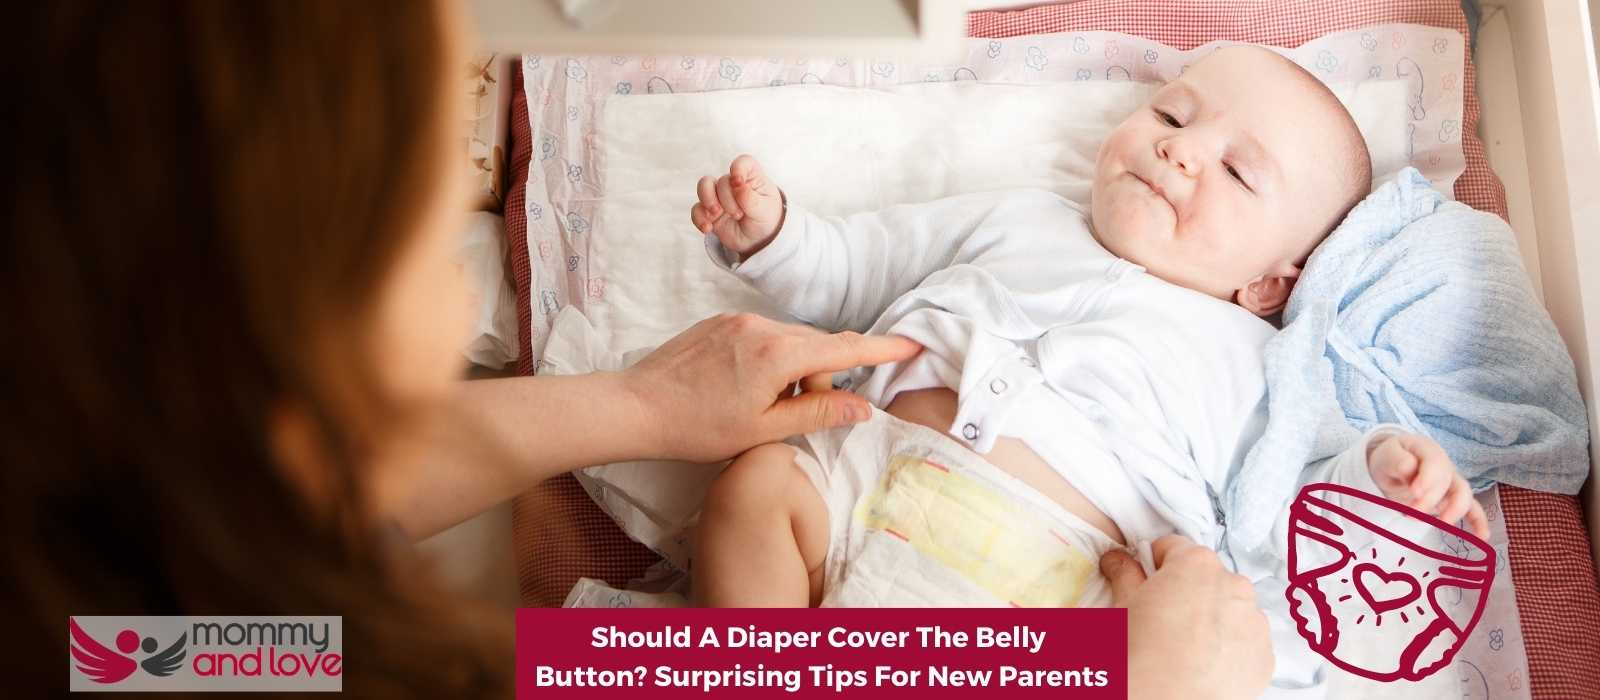 Should A Diaper Cover The Belly Button Surprising Tips For New Parents